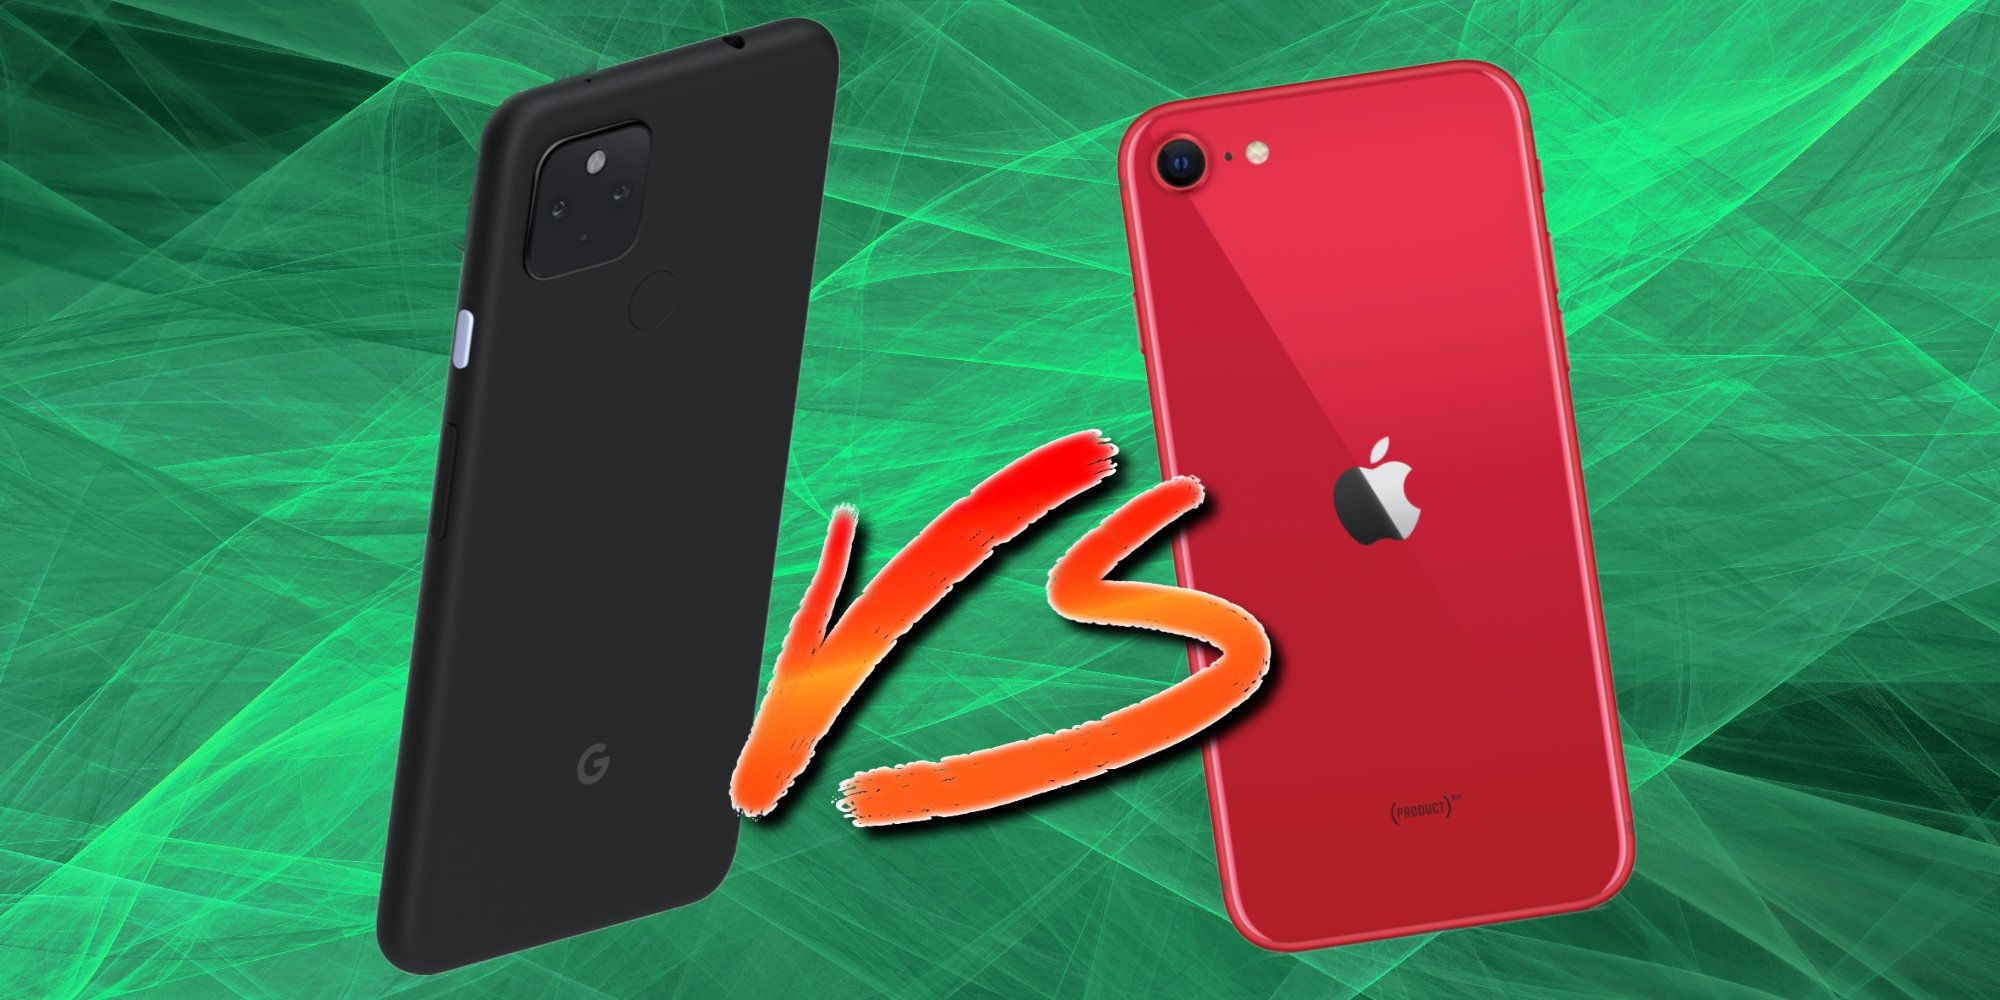 Pixel 4a 5G Vs iPhone SE Apples Budget iPhone & Googles 5G Phone Compared